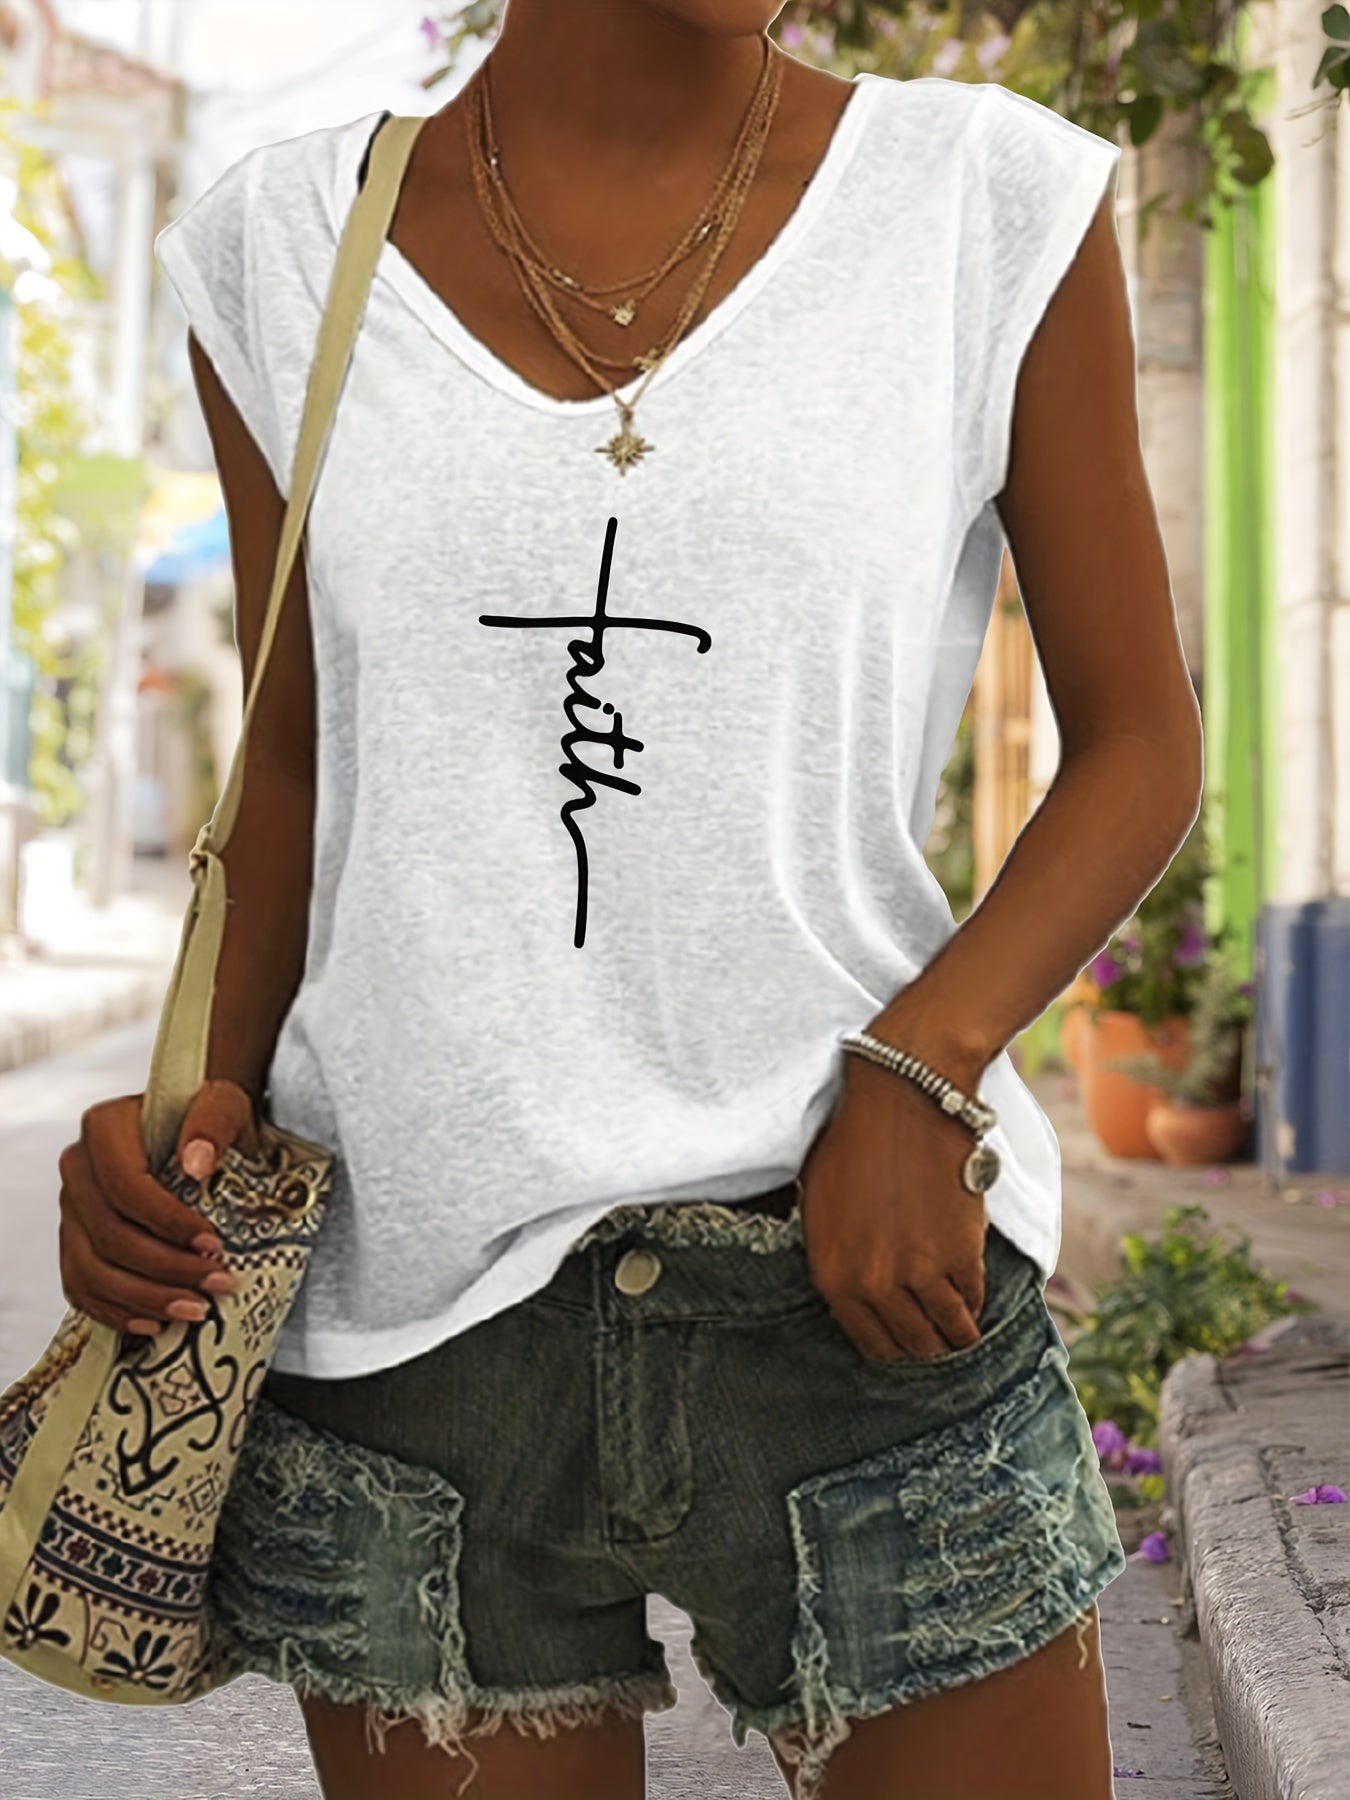 「binfenxie」Faith Letter Print Tank Top, Sleeveless V Neck Casual Top For Spring & Summer, Women's Clothing